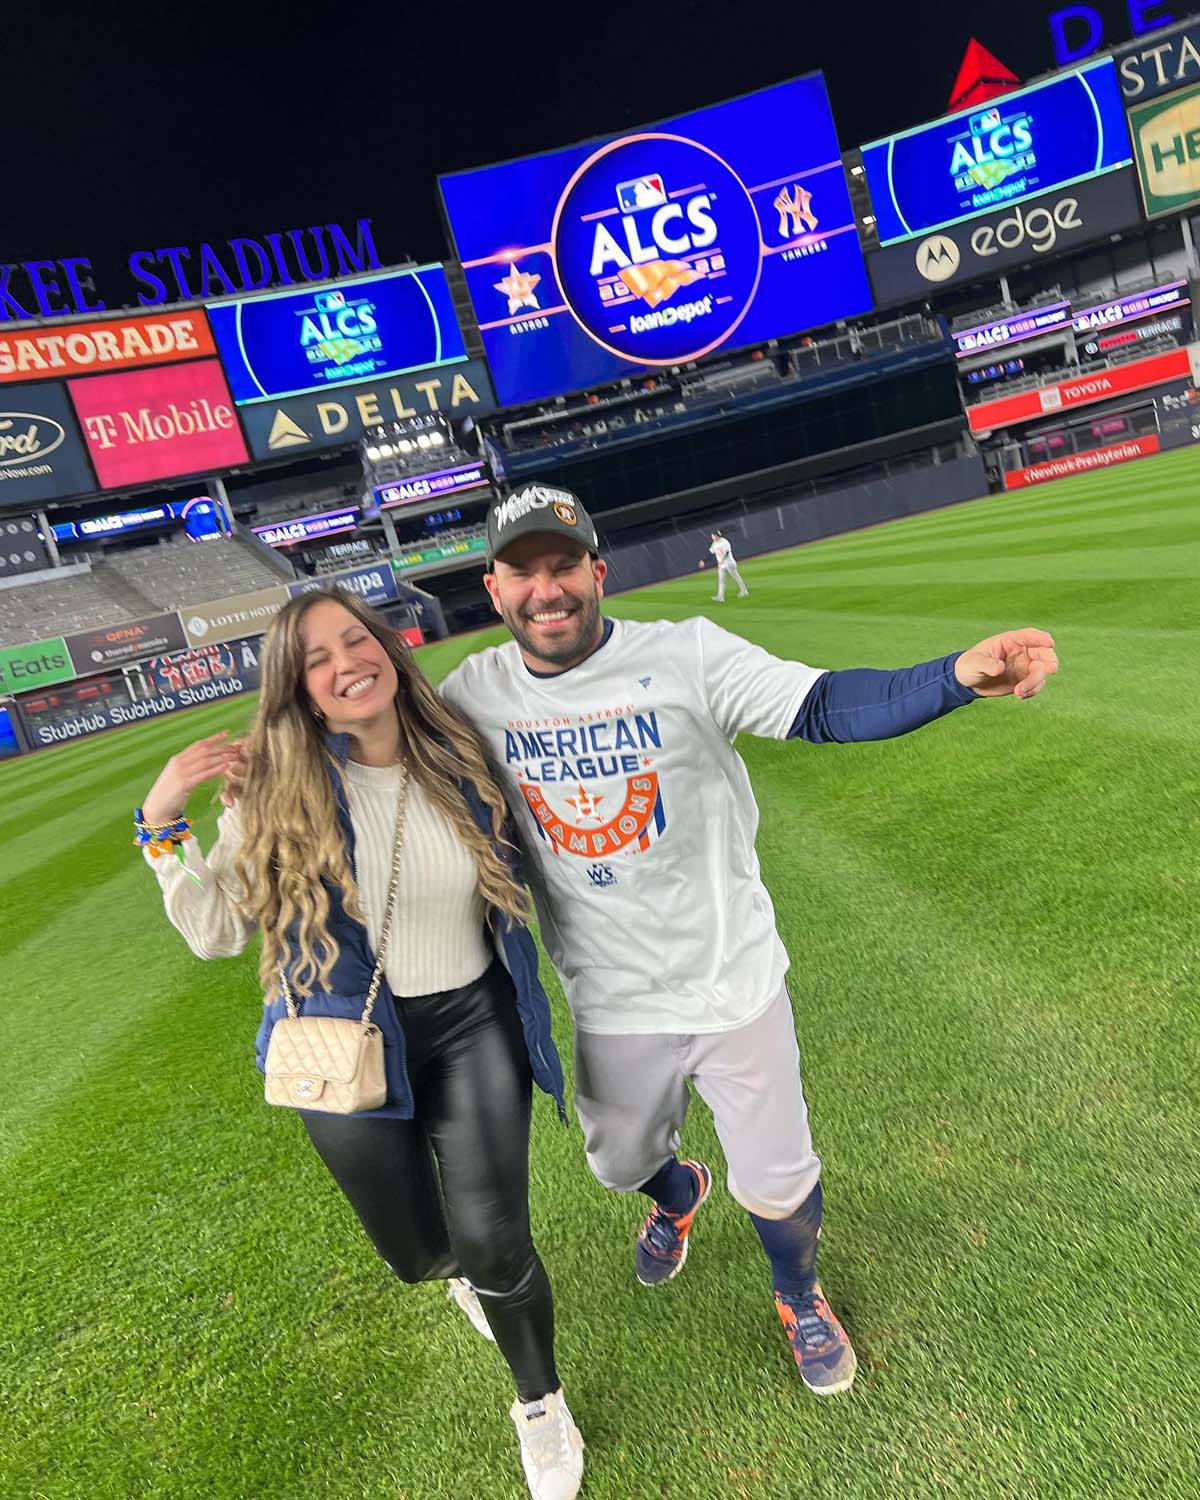 New Astros baby on board! Jose Altuve, wife expecting new baby